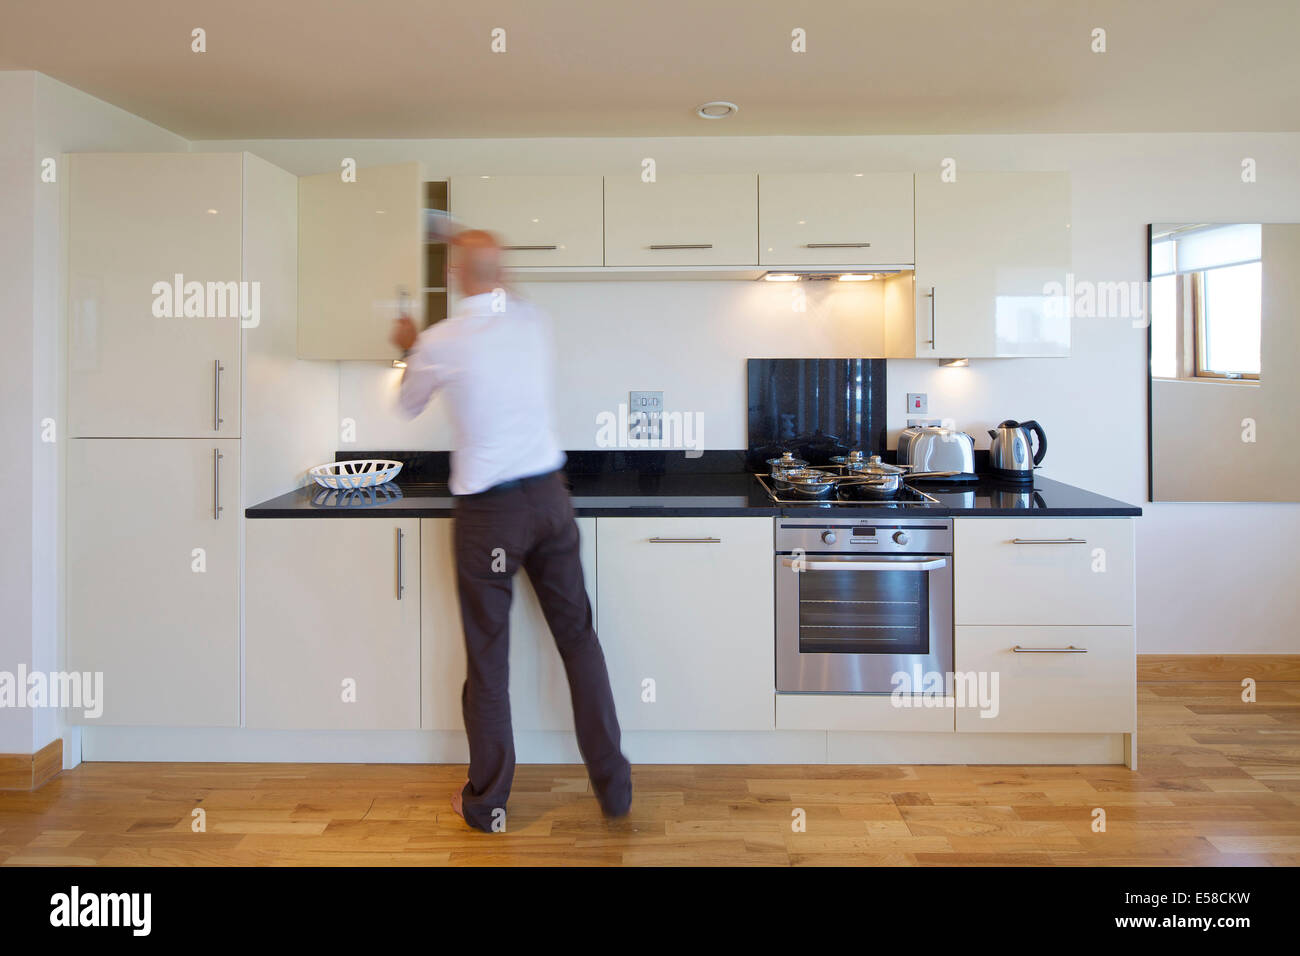 Man in kitchen at 419 Wick Lane London. New apartments built by Development securities Plc opposite the new Olympic Stadium in Stock Photo